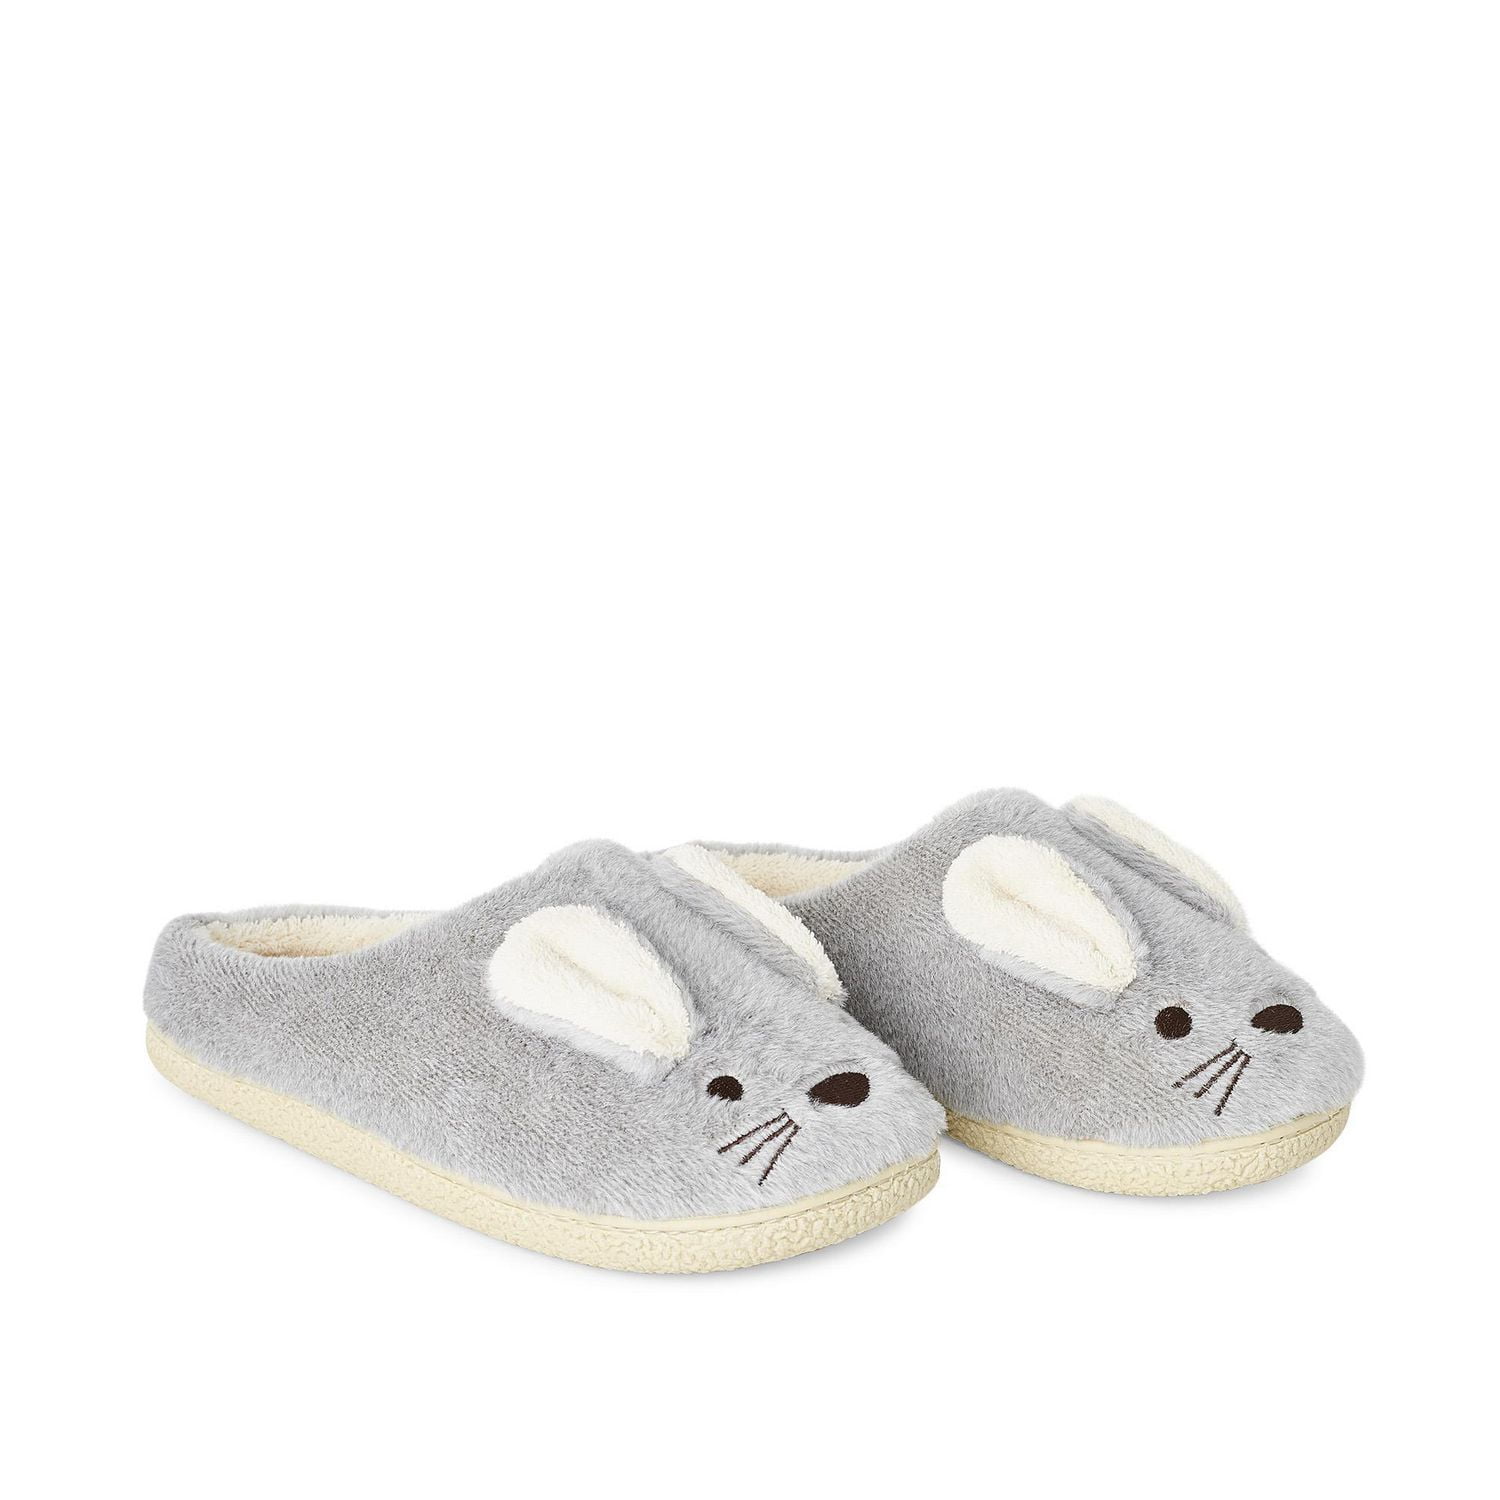 Slippers Smiley Face Slippers Women Smile Slippers Happy Face